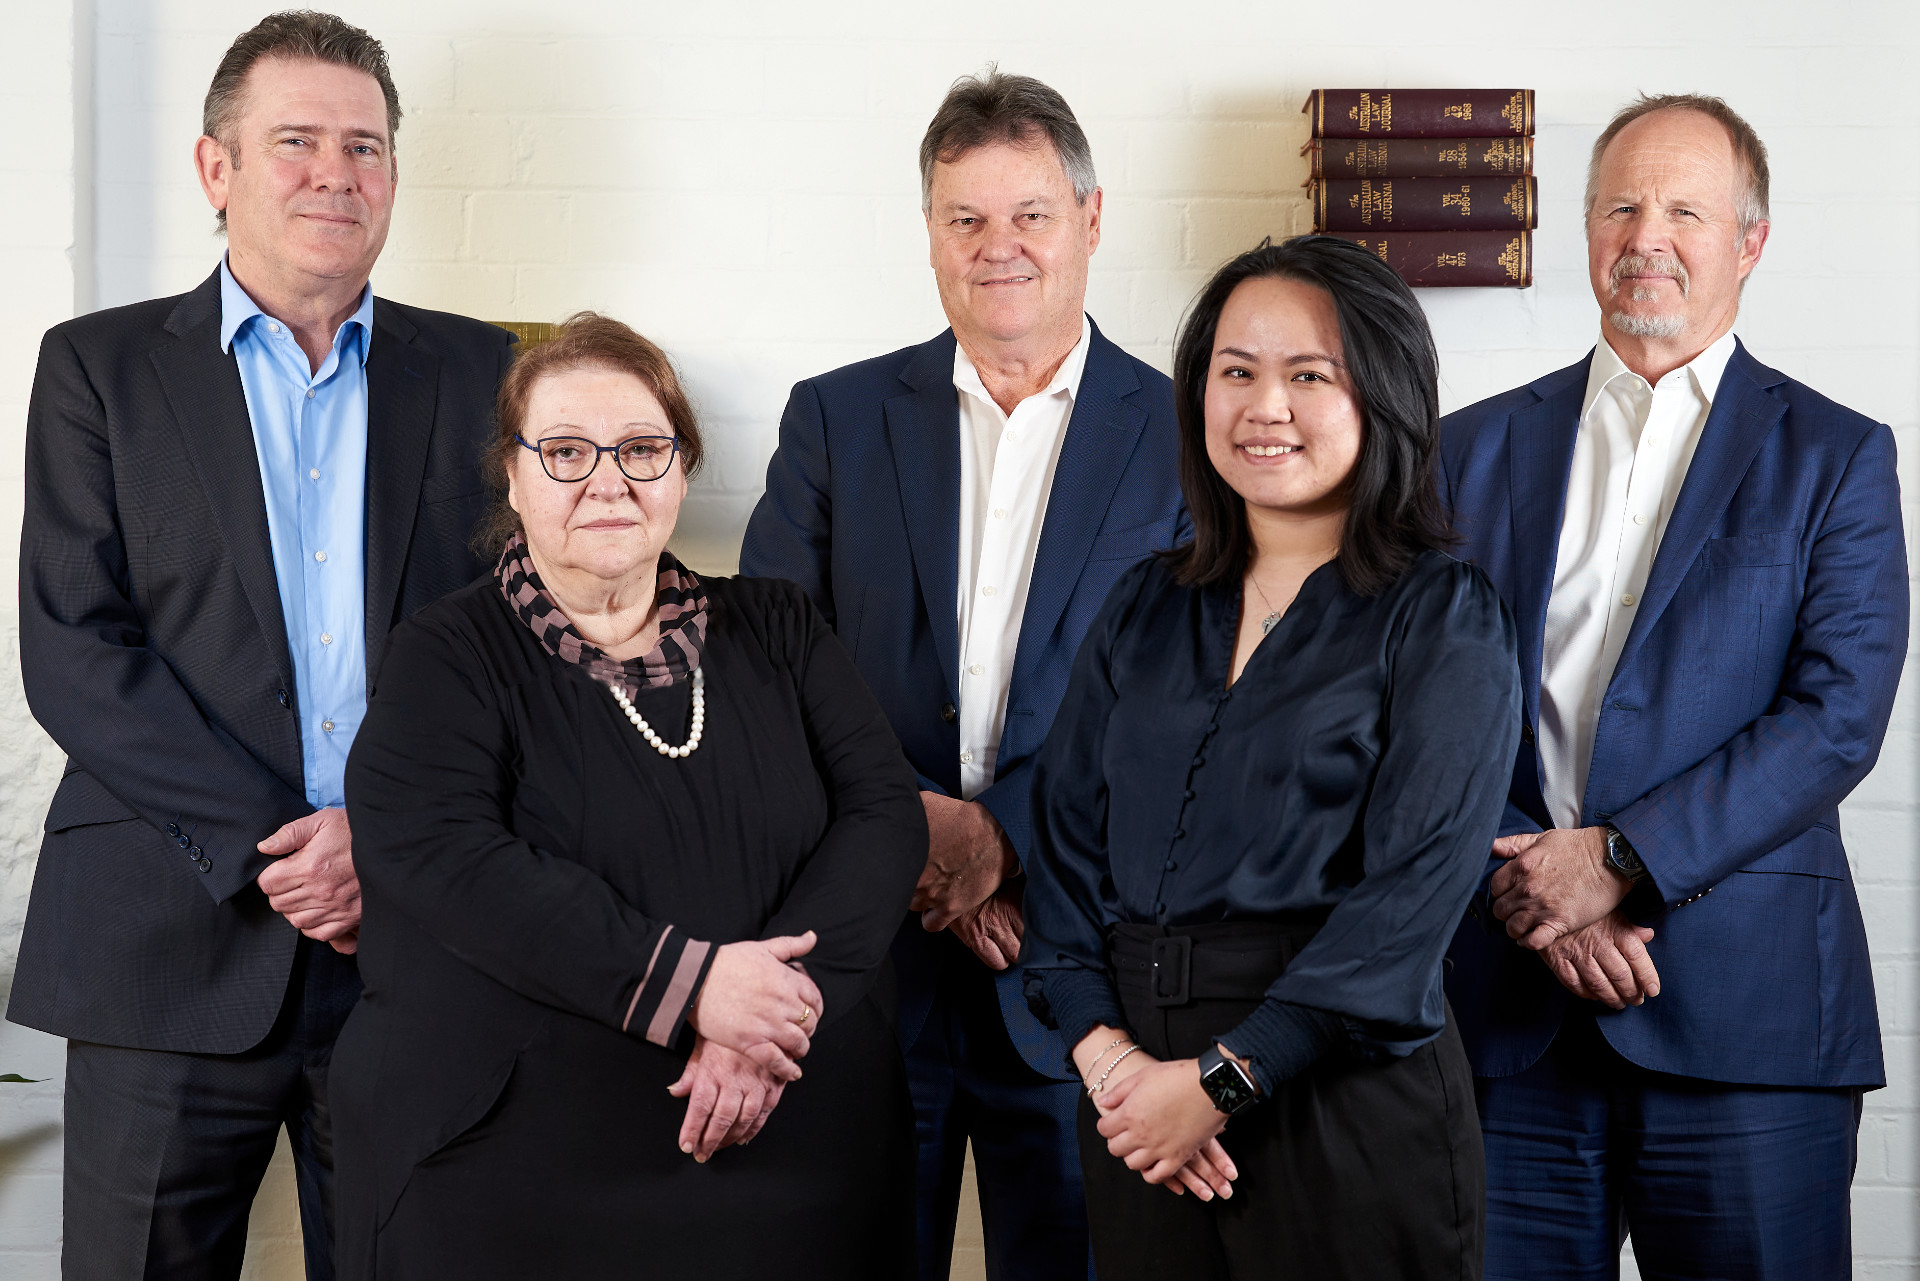 Corporate Annual Report Photography Group Headshots. By Orlando Sydney Corporate Photography